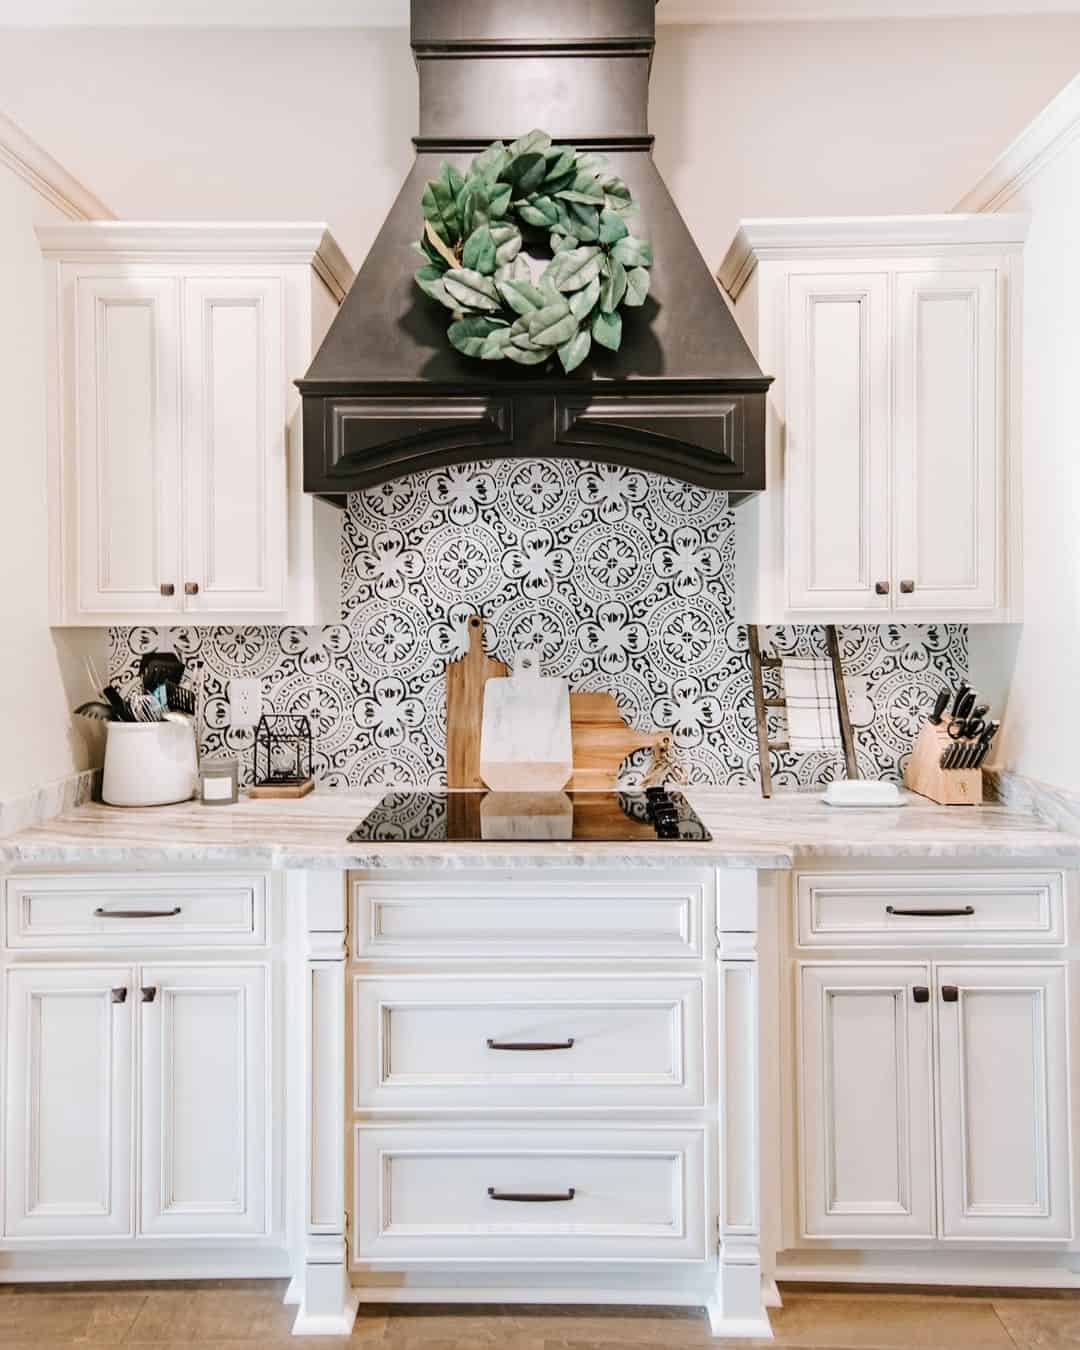 Crafting an Intricate Backsplash for a Compact Kitchen